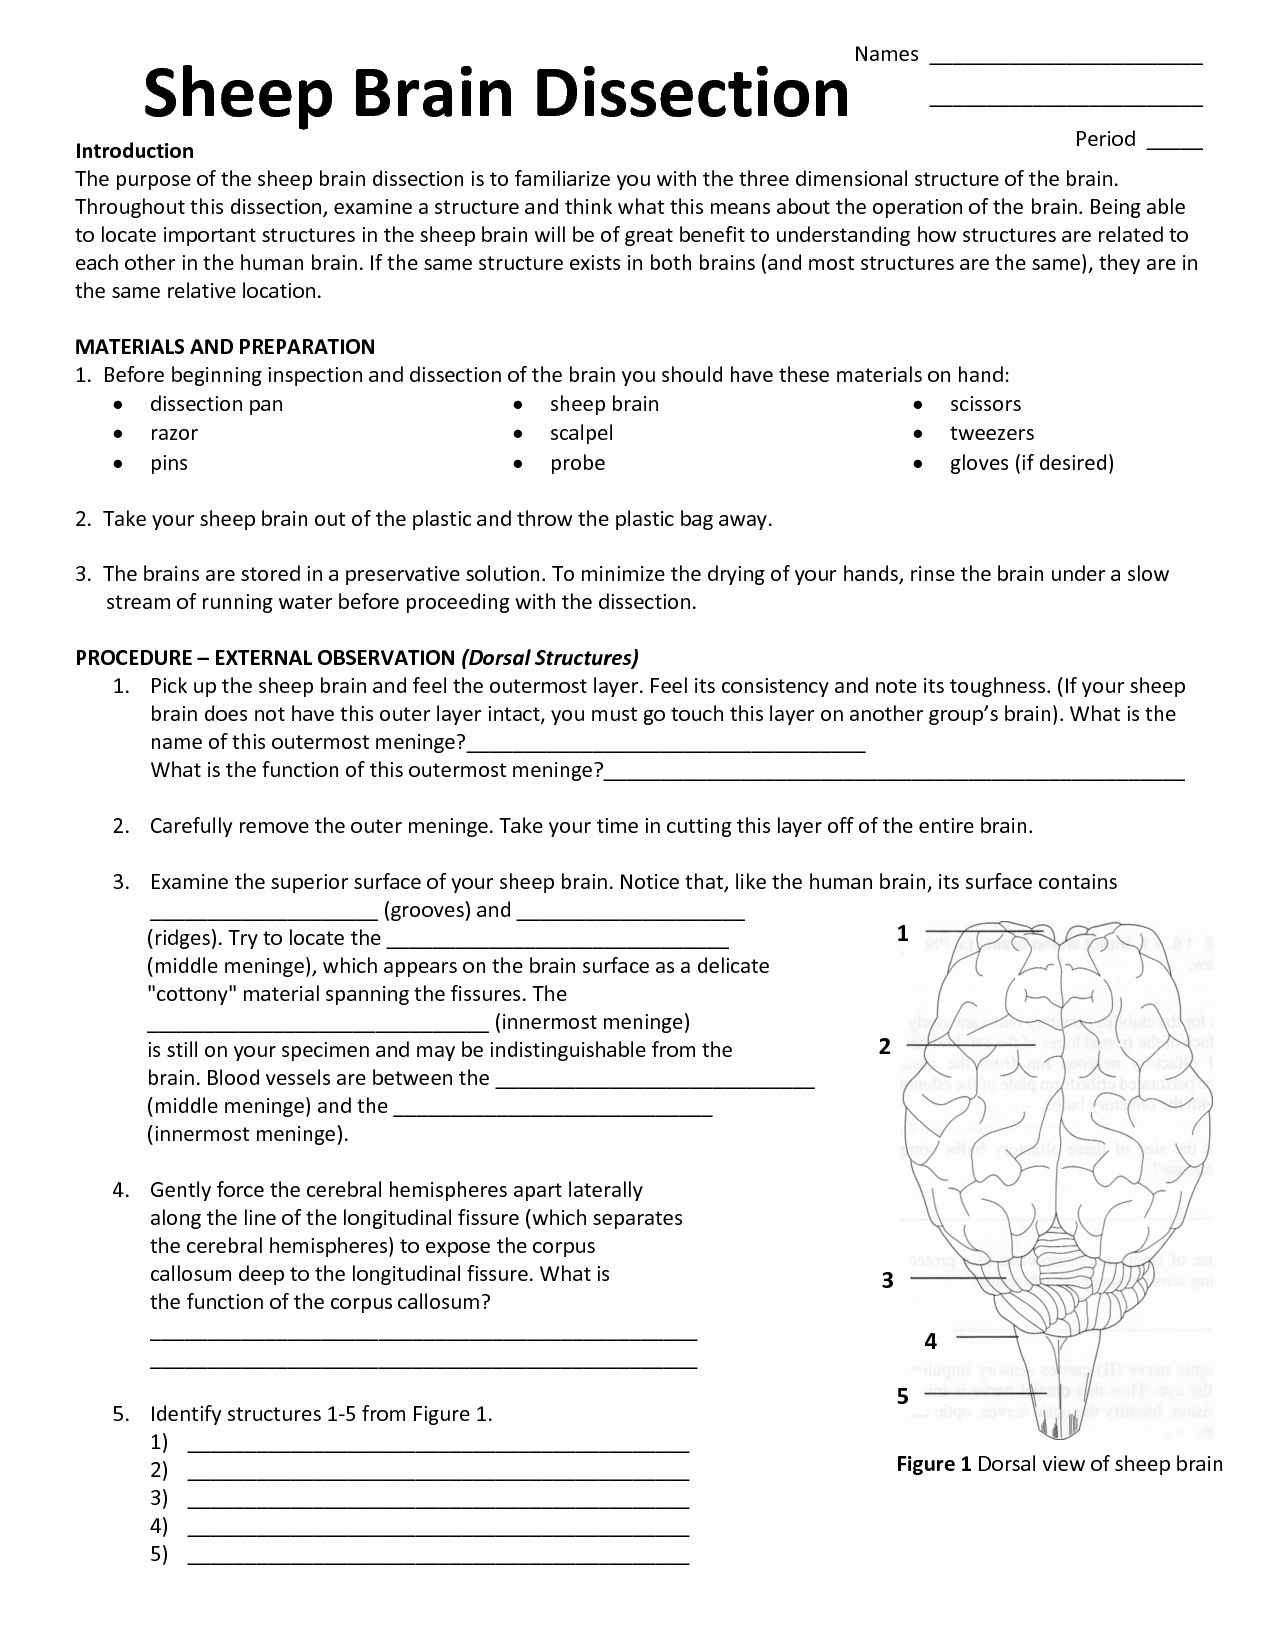 Sheep Brain Dissection Worksheet Awesome 6 Best Of Sheep Brain Dissection Diagram Sheep